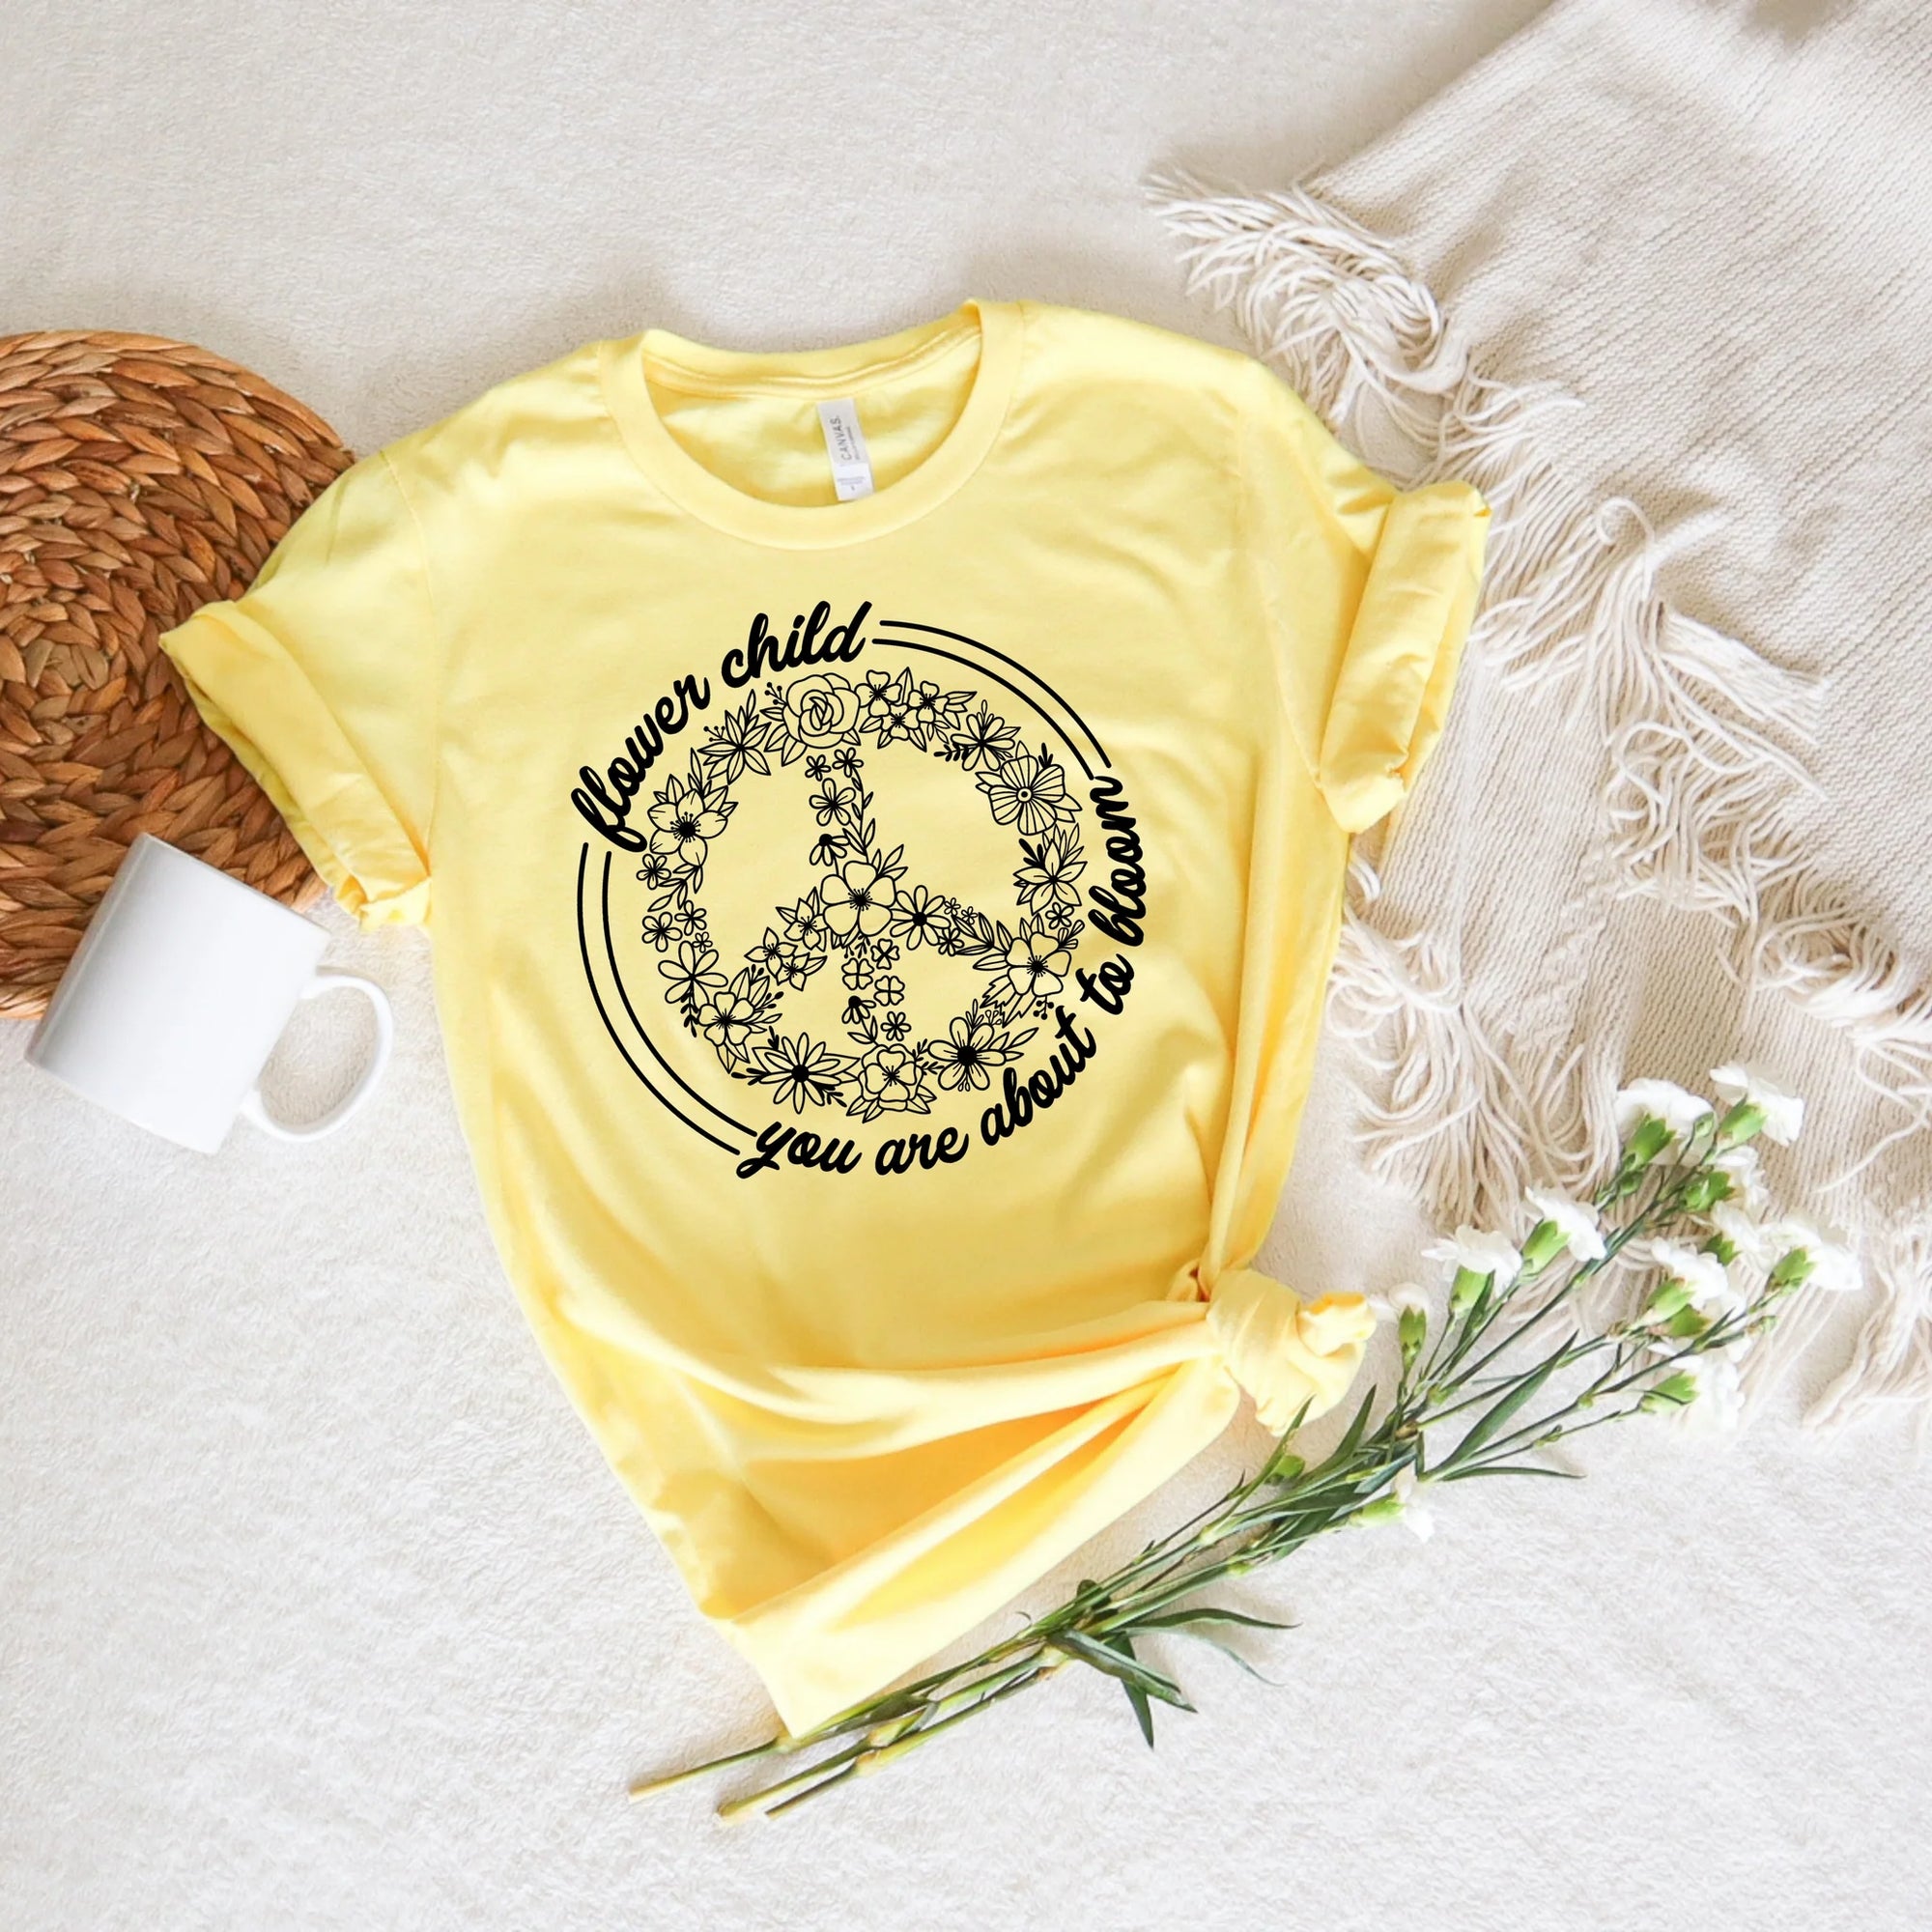 Flower child you are about to bloom Graphic tee